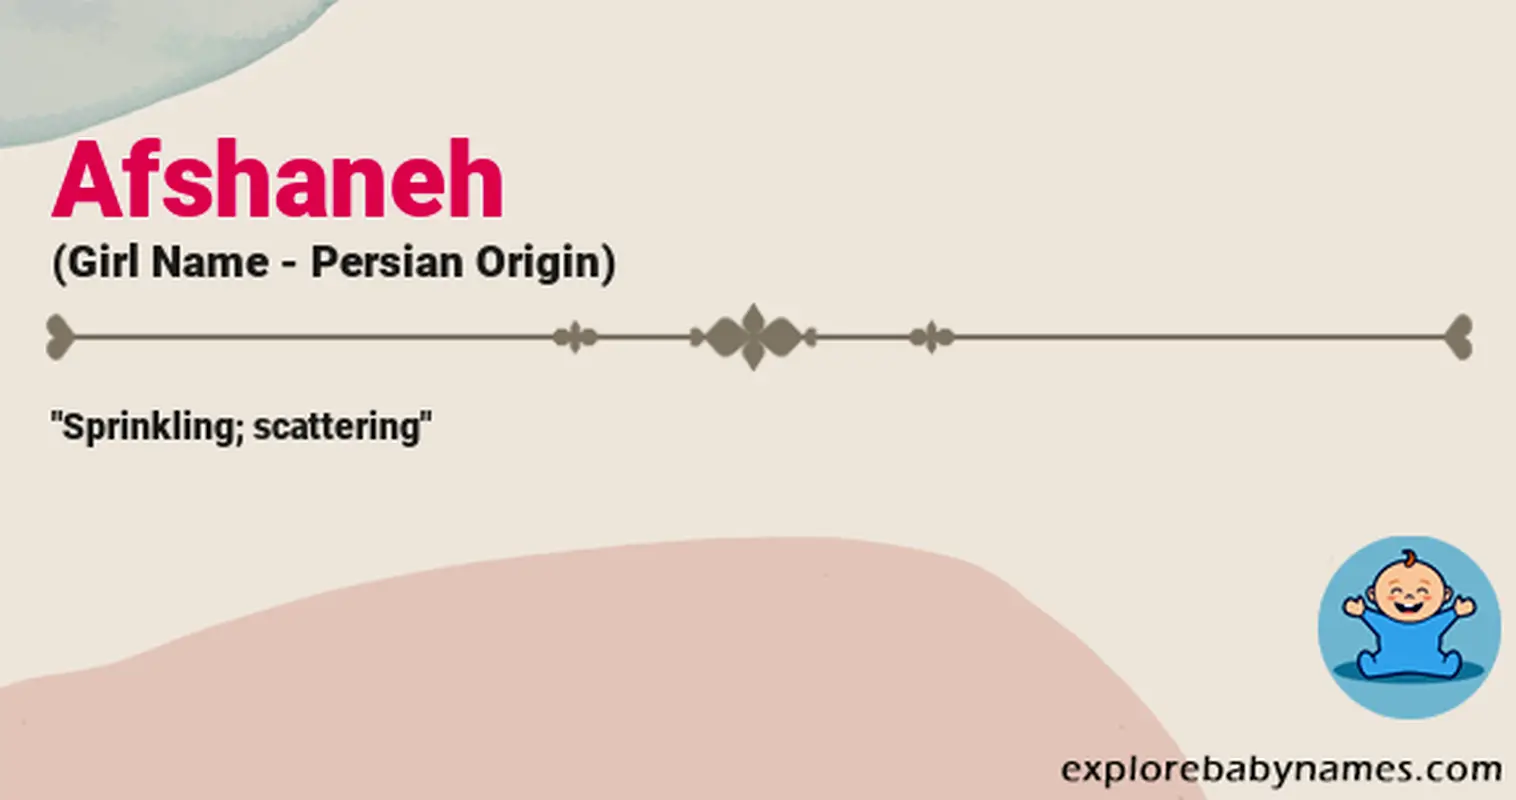 Meaning of Afshaneh